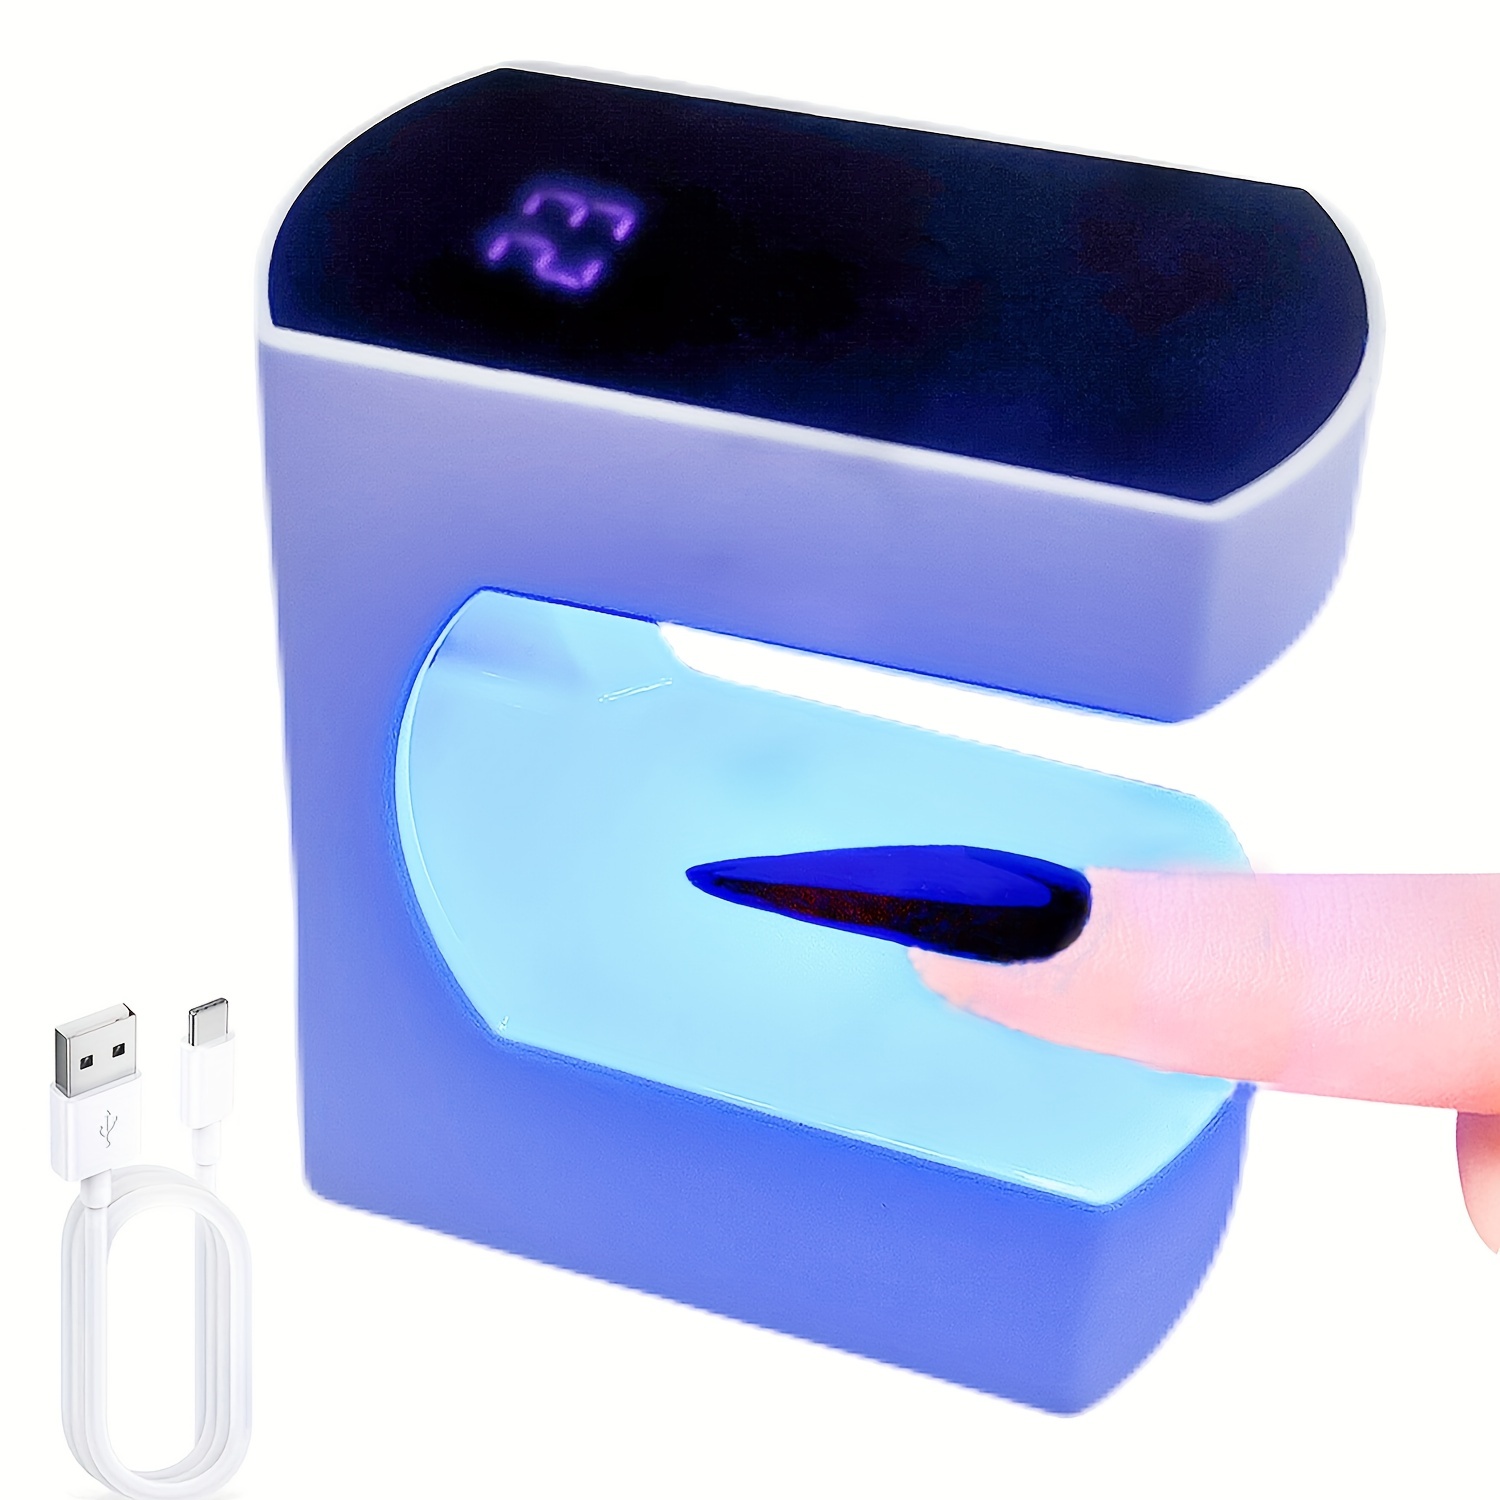 

Mini Led Nail Lamp, Uv Light For Nails With Timer Uv Lamp For Gel Nails Quicky-dry Nail Light Portable Usb Nail Dryer For Travel Manicure Tool Nail Art Tool